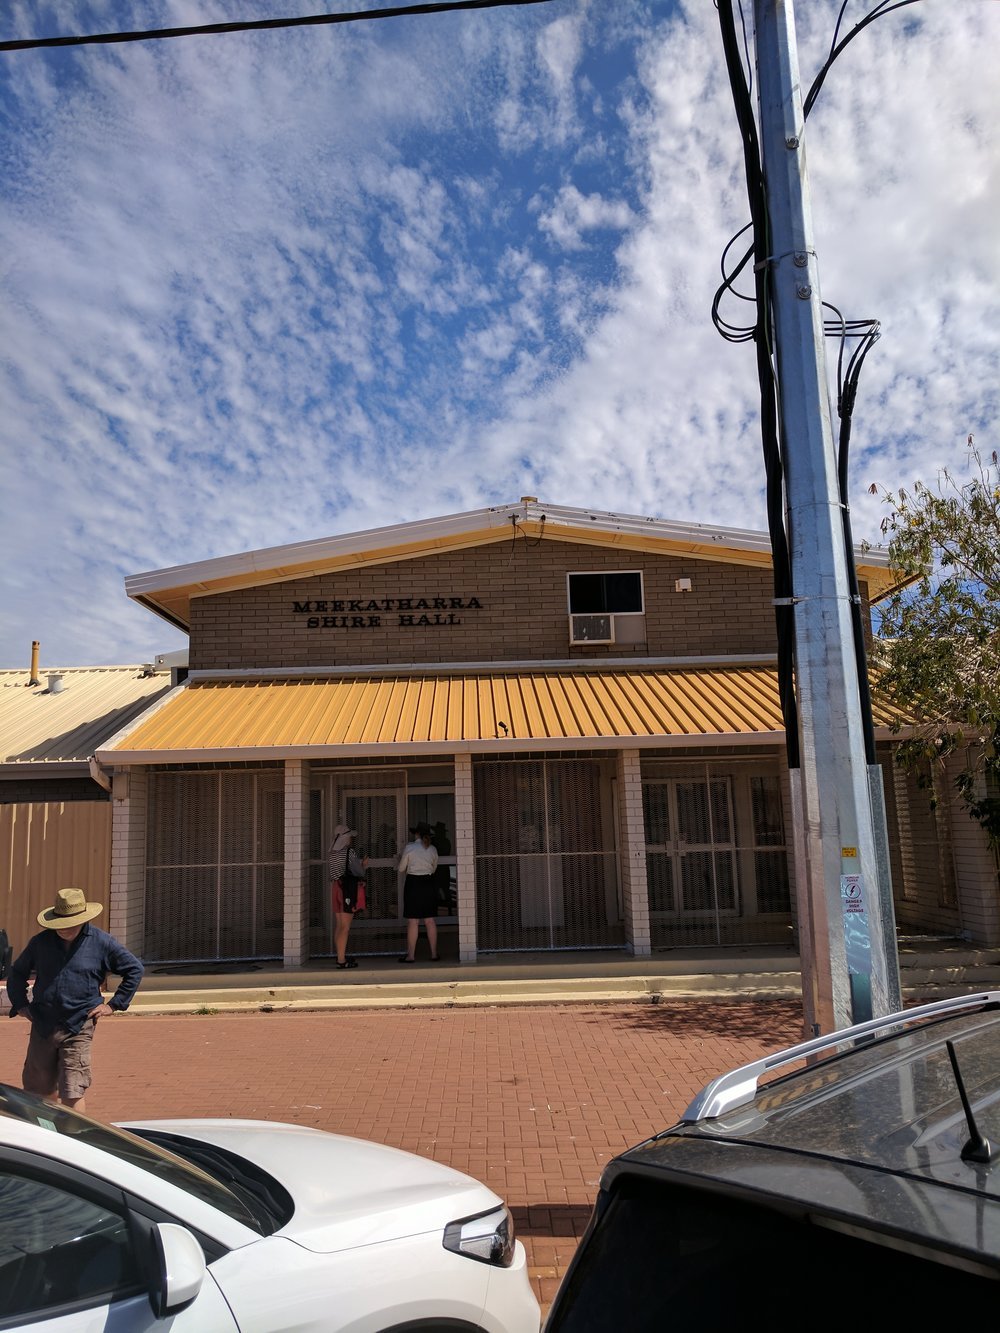  The Meekatharra Shire Hall, where balls and community gatherings happen 